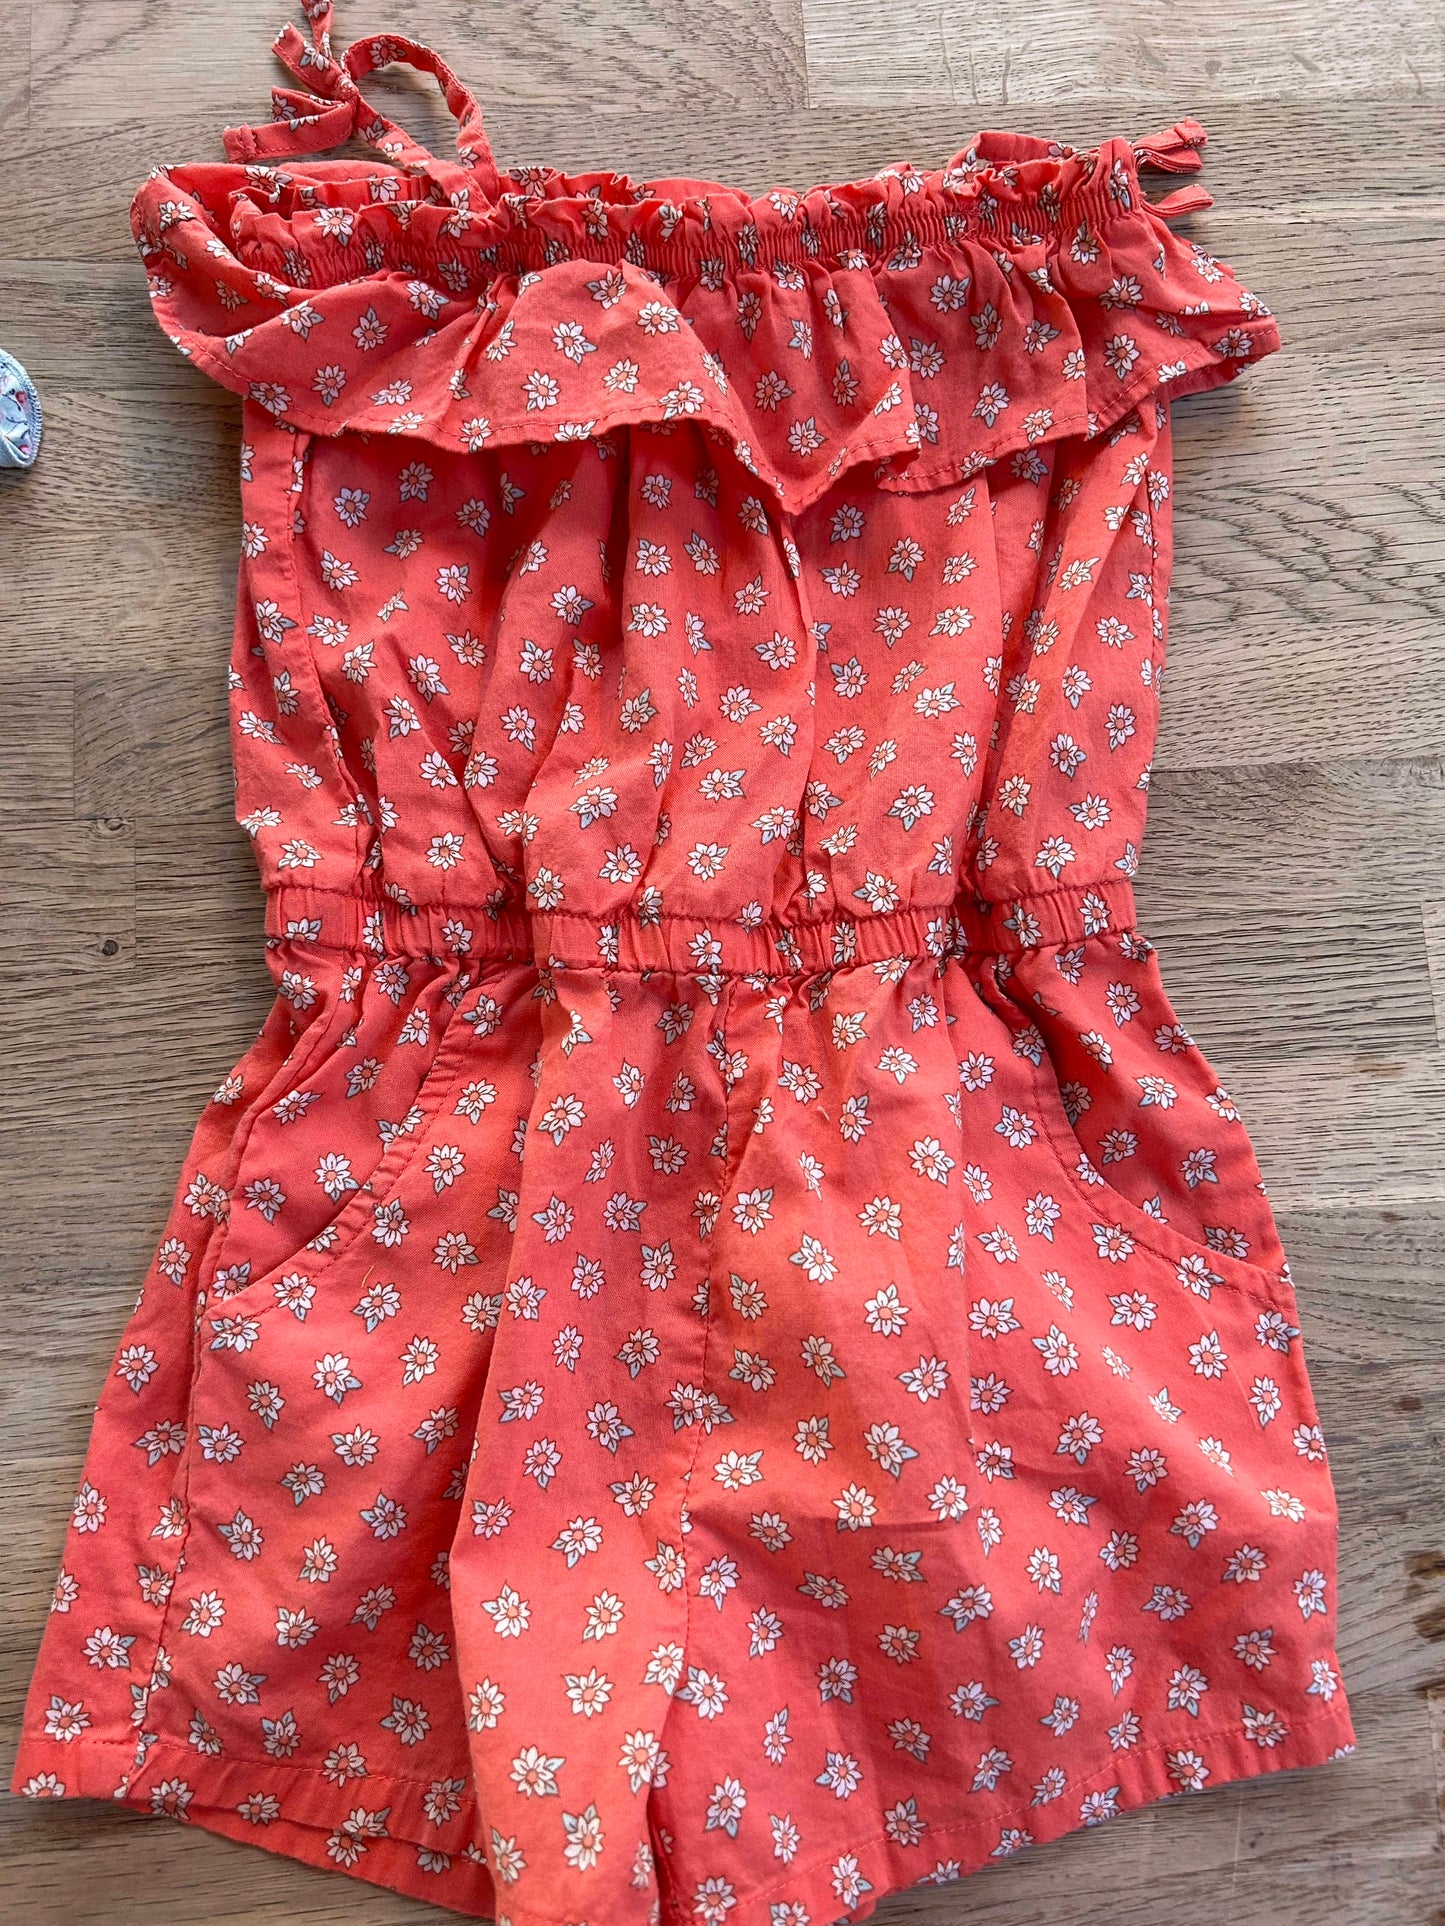 Floral One-Piece Romper (Pre-Loved) Size 3t